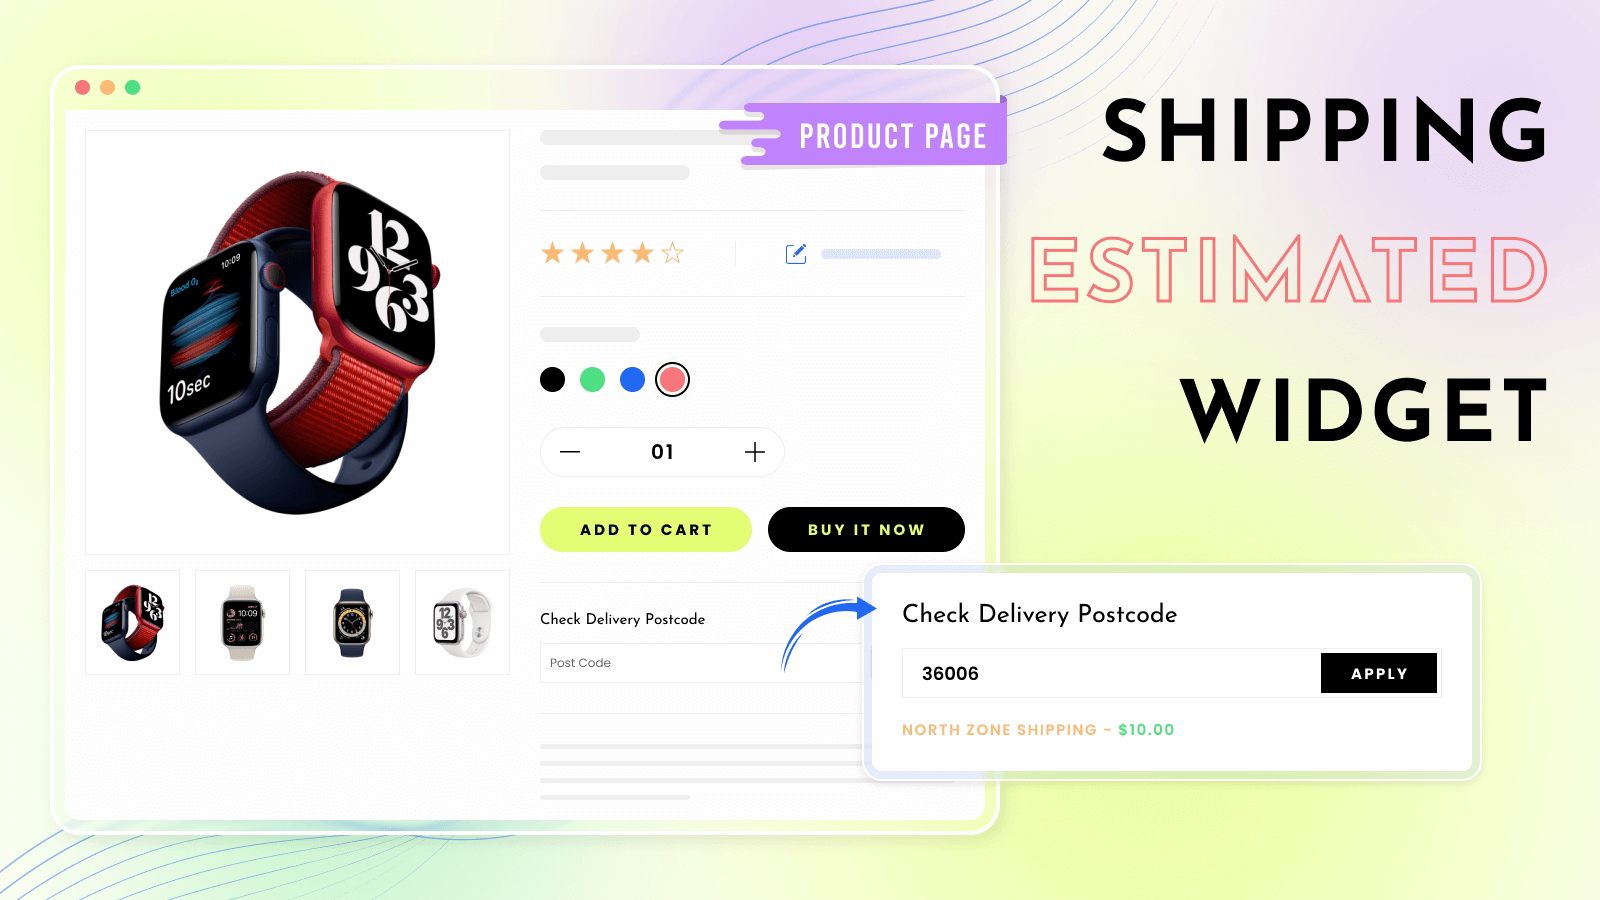 Shipping widget estimation on product page, Shipping calculator